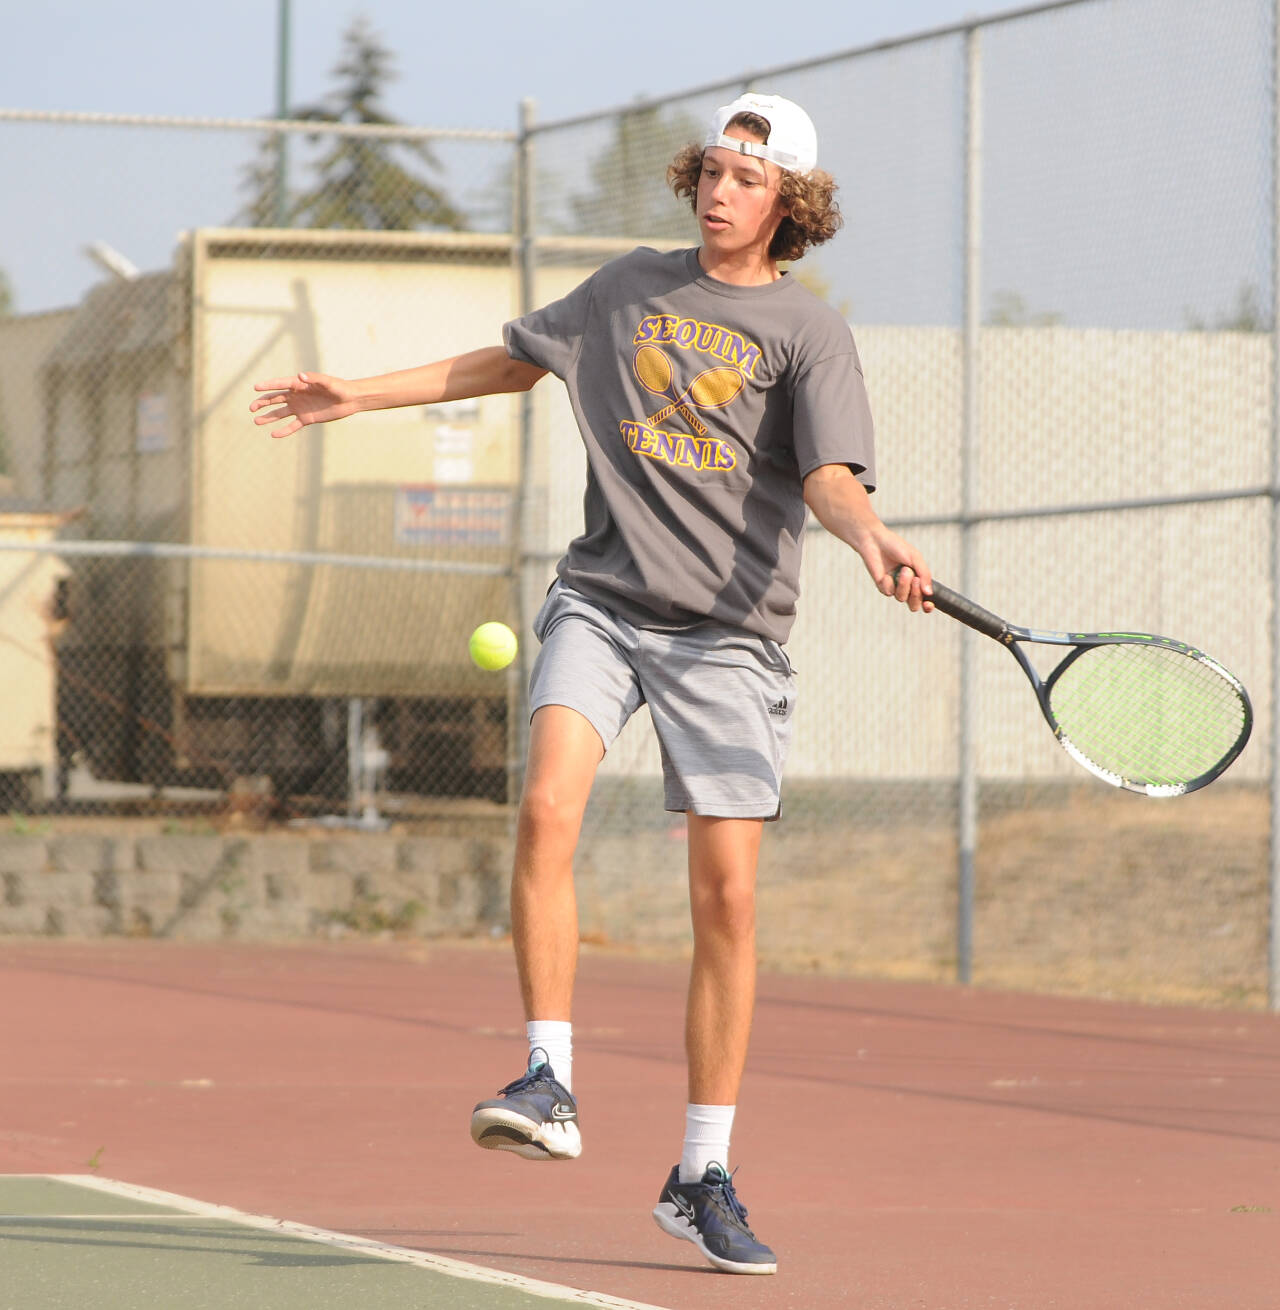 Michael Dashiell/Sequim Gazette
Sequim’s Garrett Little returns a shot as he takes on North Kitsap’s Indigo Gallagher-Zapf in No. 1 singles play on Sept. 13. Sequim was scheduled to play Kingston on Sept. 19. Little topped Gallagher-Zapf 6-1, 6-0. The Wolves are at Olympic on Sept. 21 and host Port Angeles on Sept. 22.